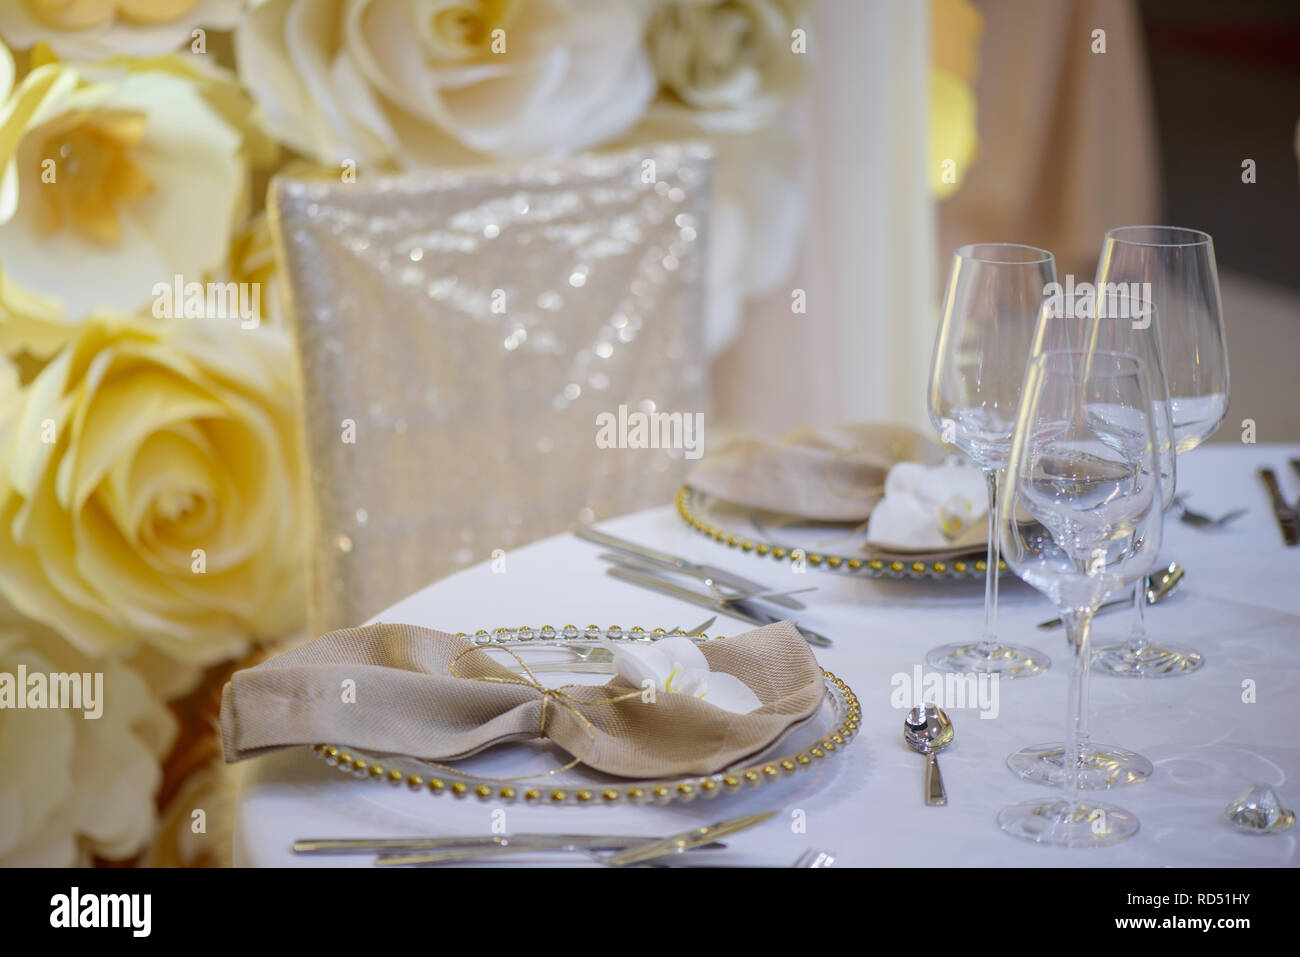 Sitting arrangement at a formal event or fine dining restaurant featuring transparent plates with golden details, with elegan glassware and silverware Stock Photo